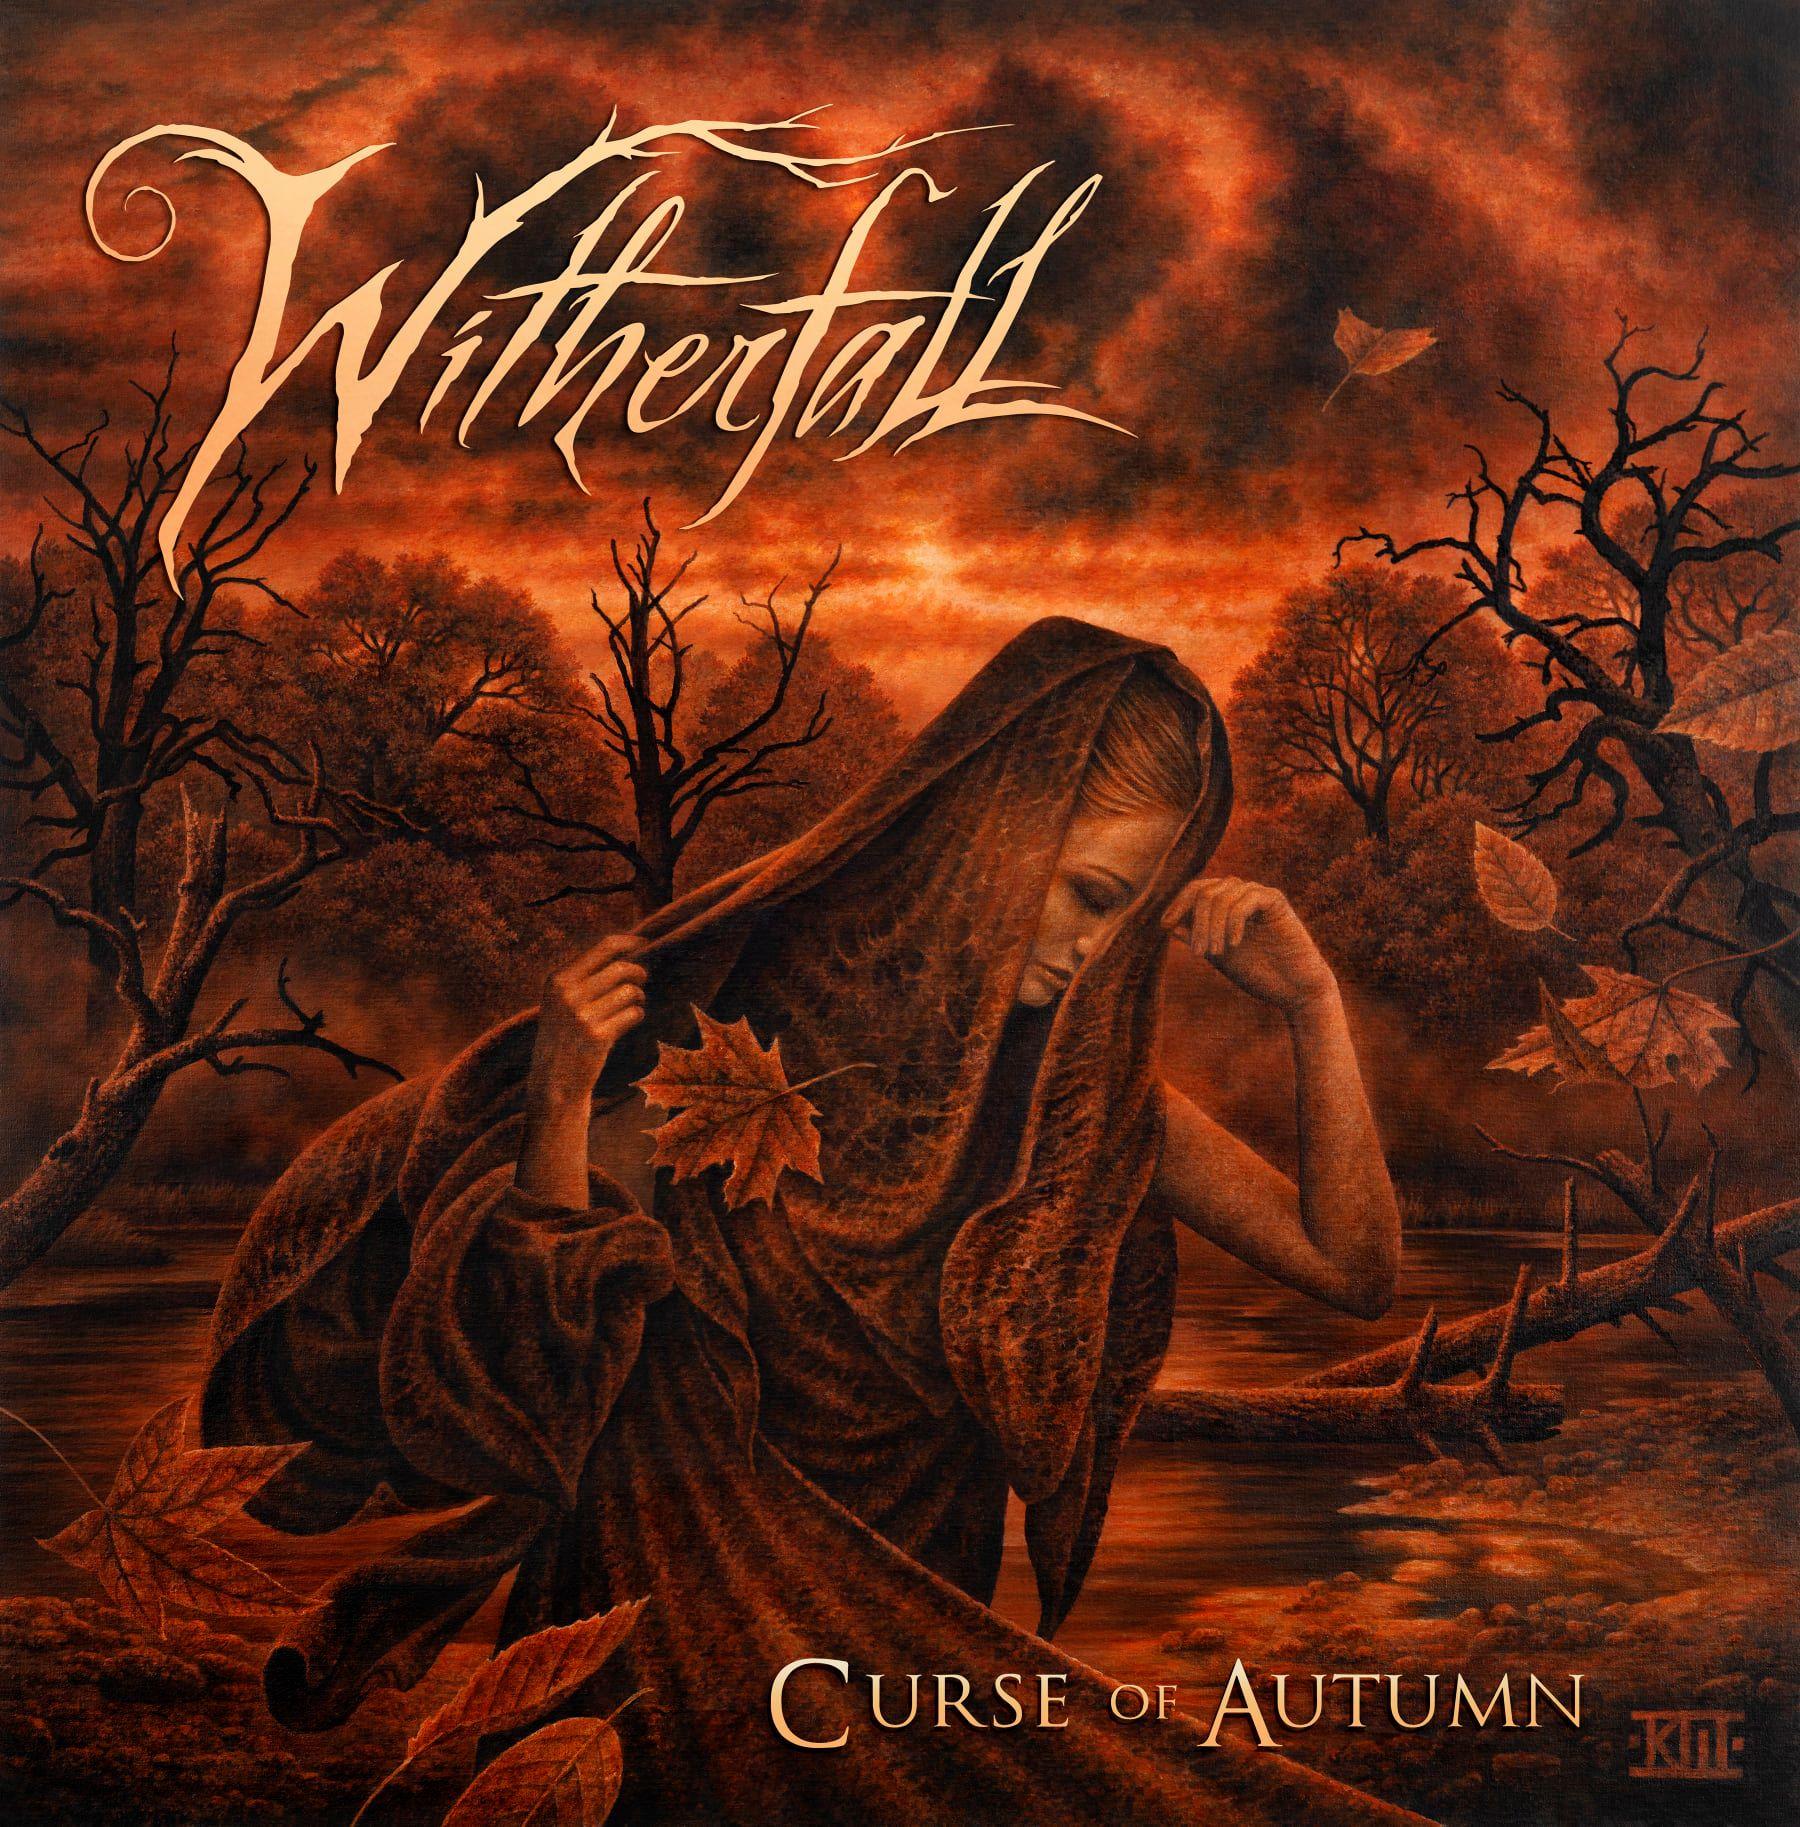 Curse of autumn witherfall